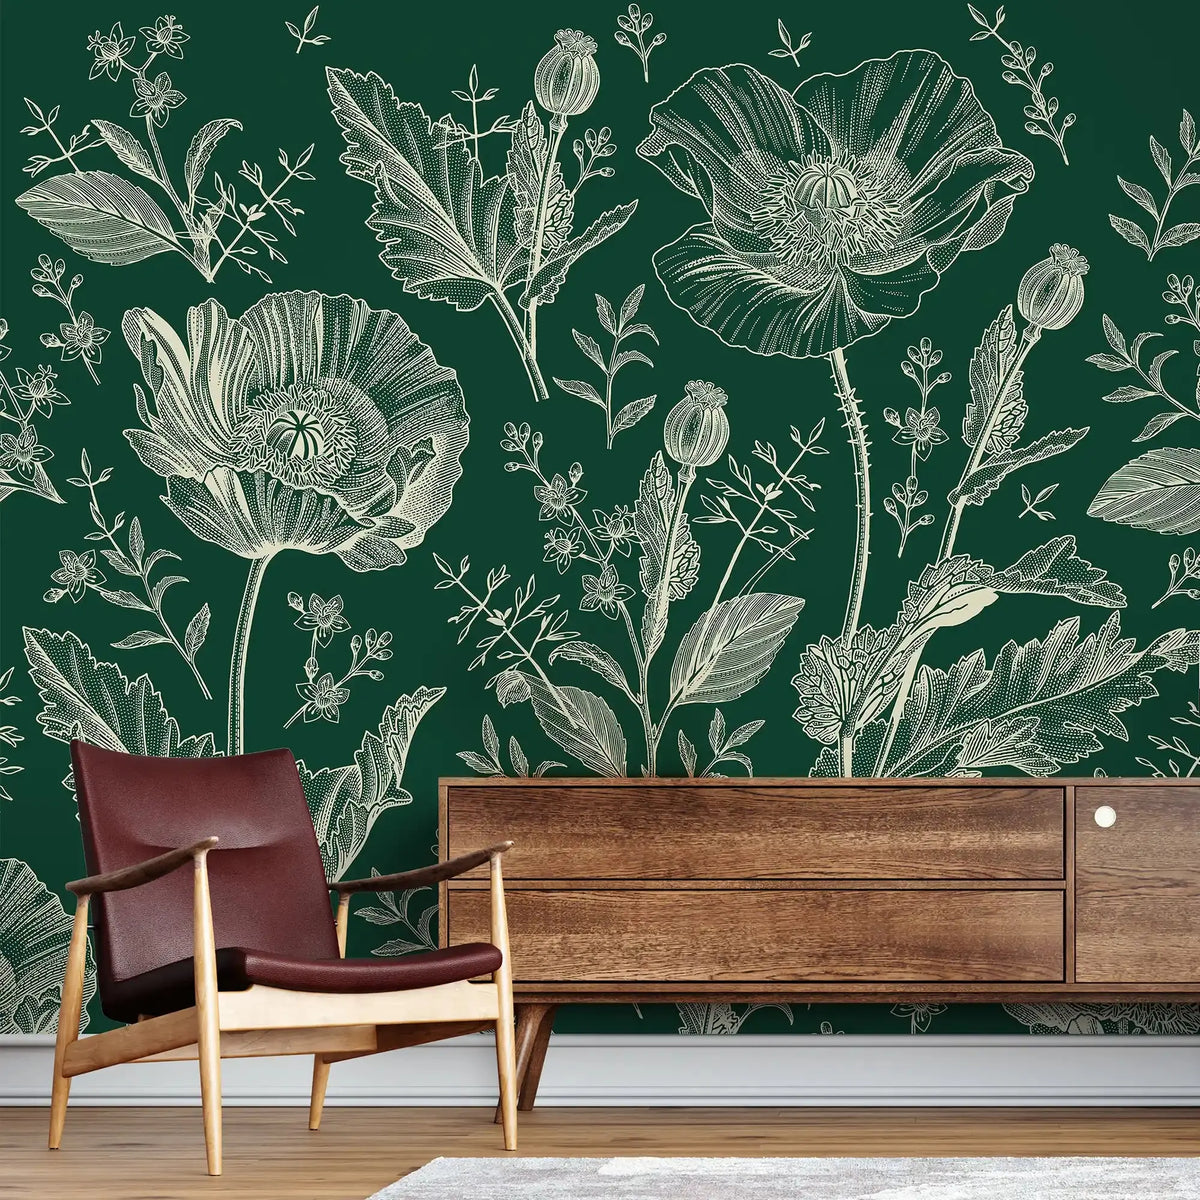 3093-C / Floral Wall Mural: Self Adhesive, Removable Wallpaper for Modern and Boho Decor - Artevella